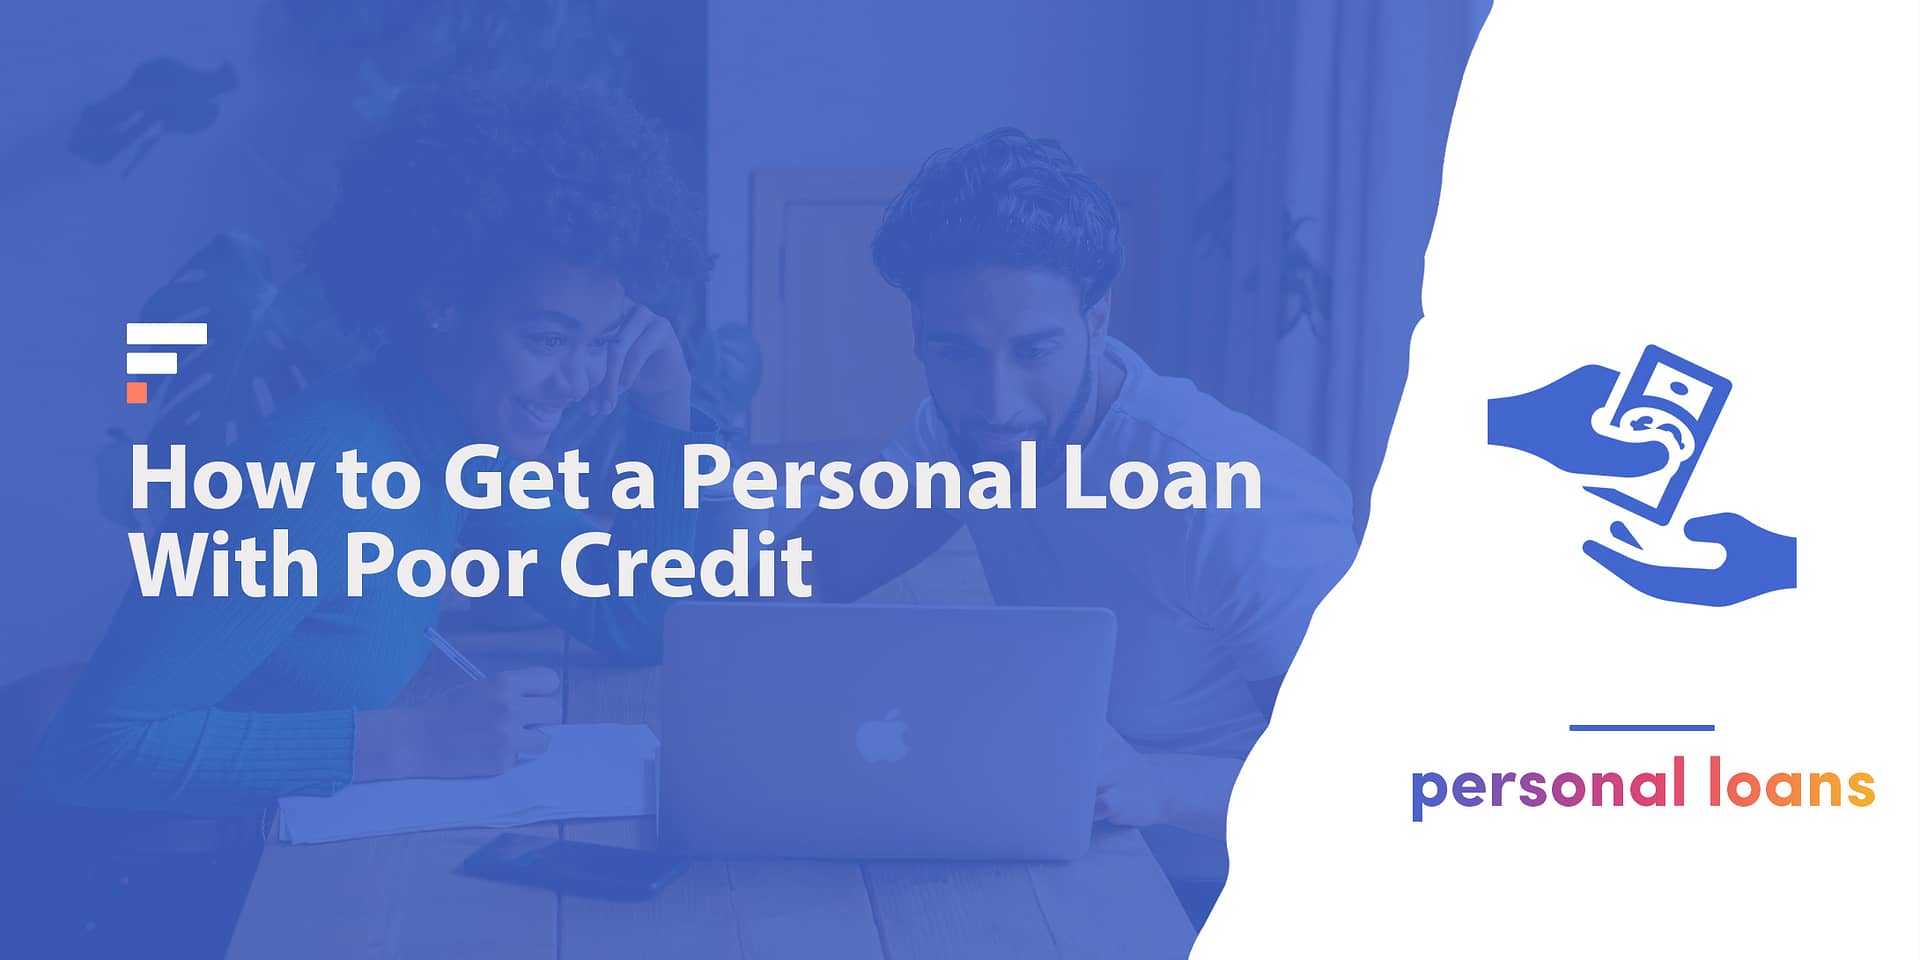 How to Get a Personal Loan With Poor Credit (450-579 Credit Score)